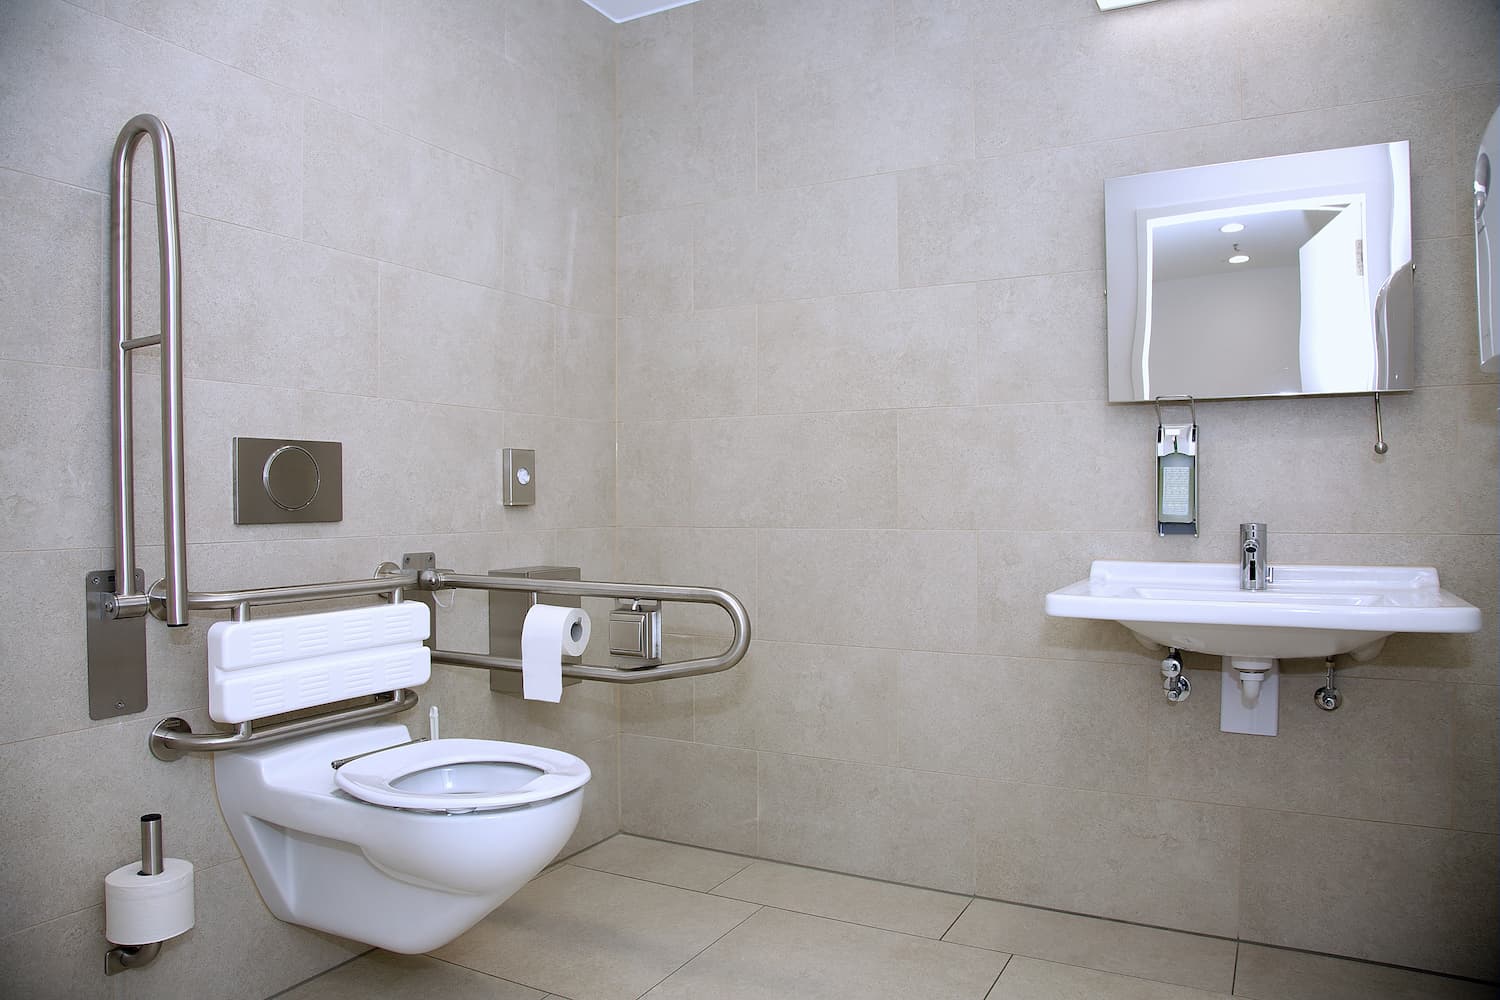 10 Tips to Create a Bathroom for Aging in Place